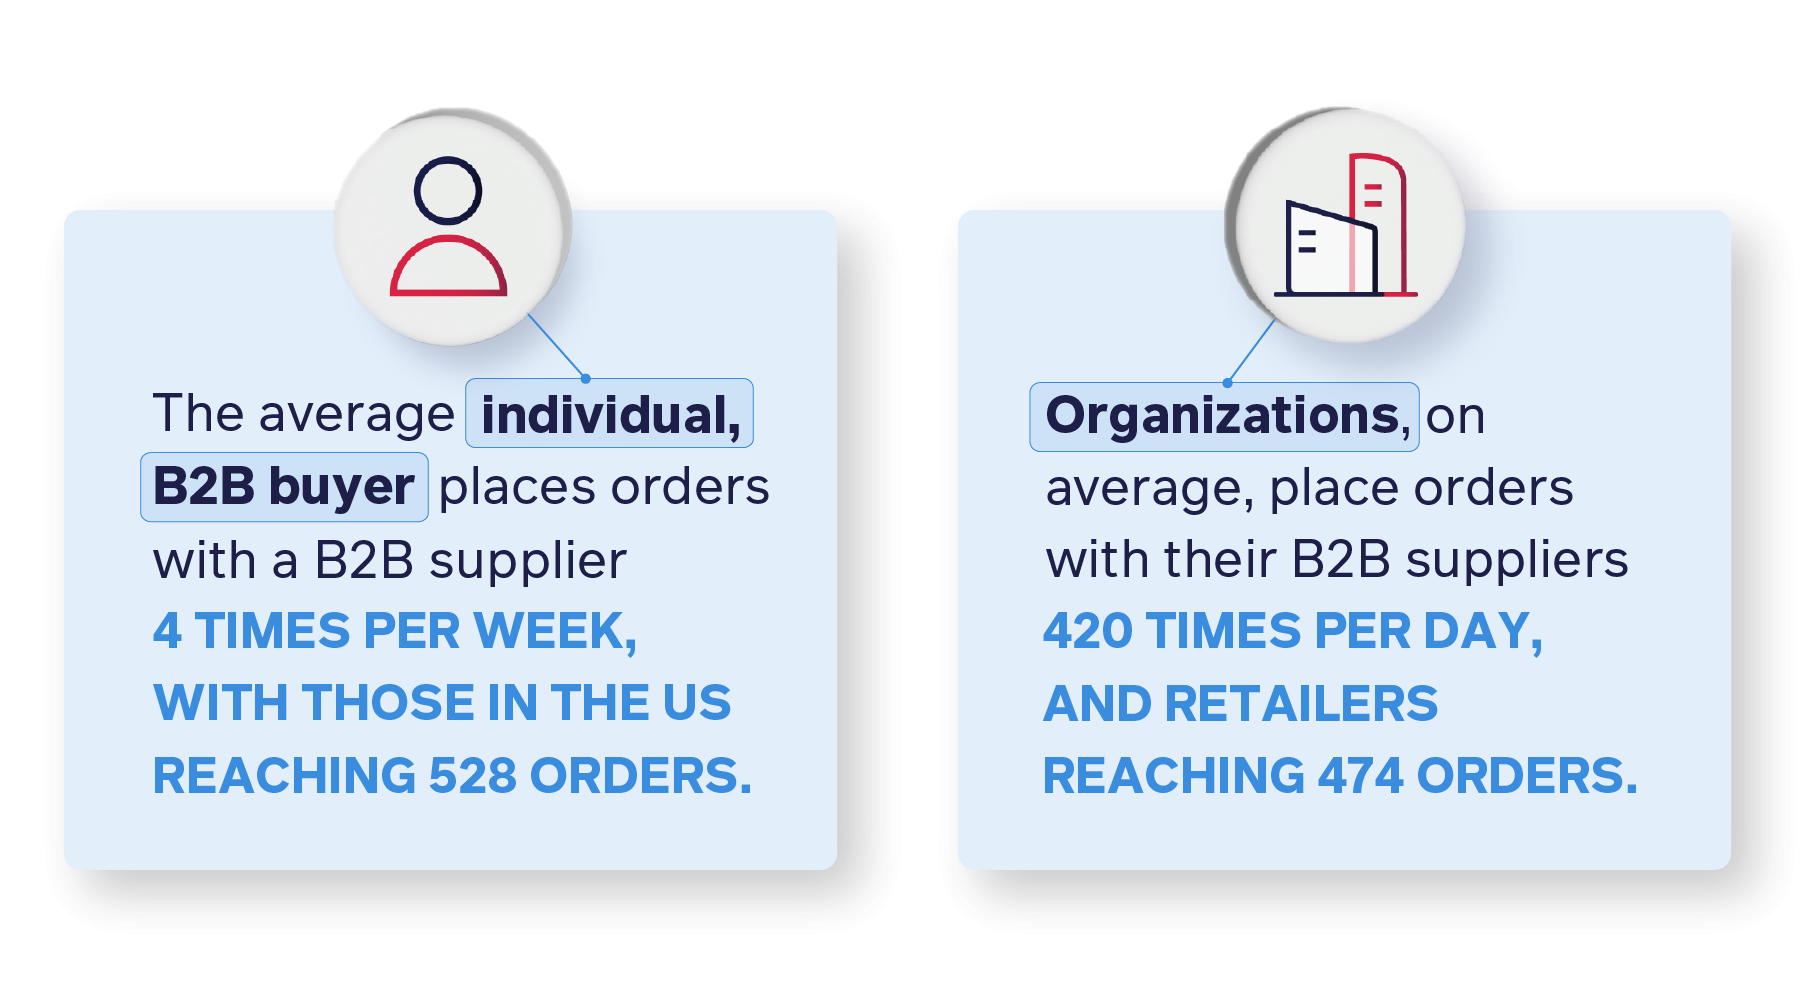 The average individual, B2B buyer places orders with a B2B supplier 4 times per week, with those in the US reaching 528 orders Organizations, on average, place orders with their B2B suppliers 420 times per day, and retailers reaching 474 orders.